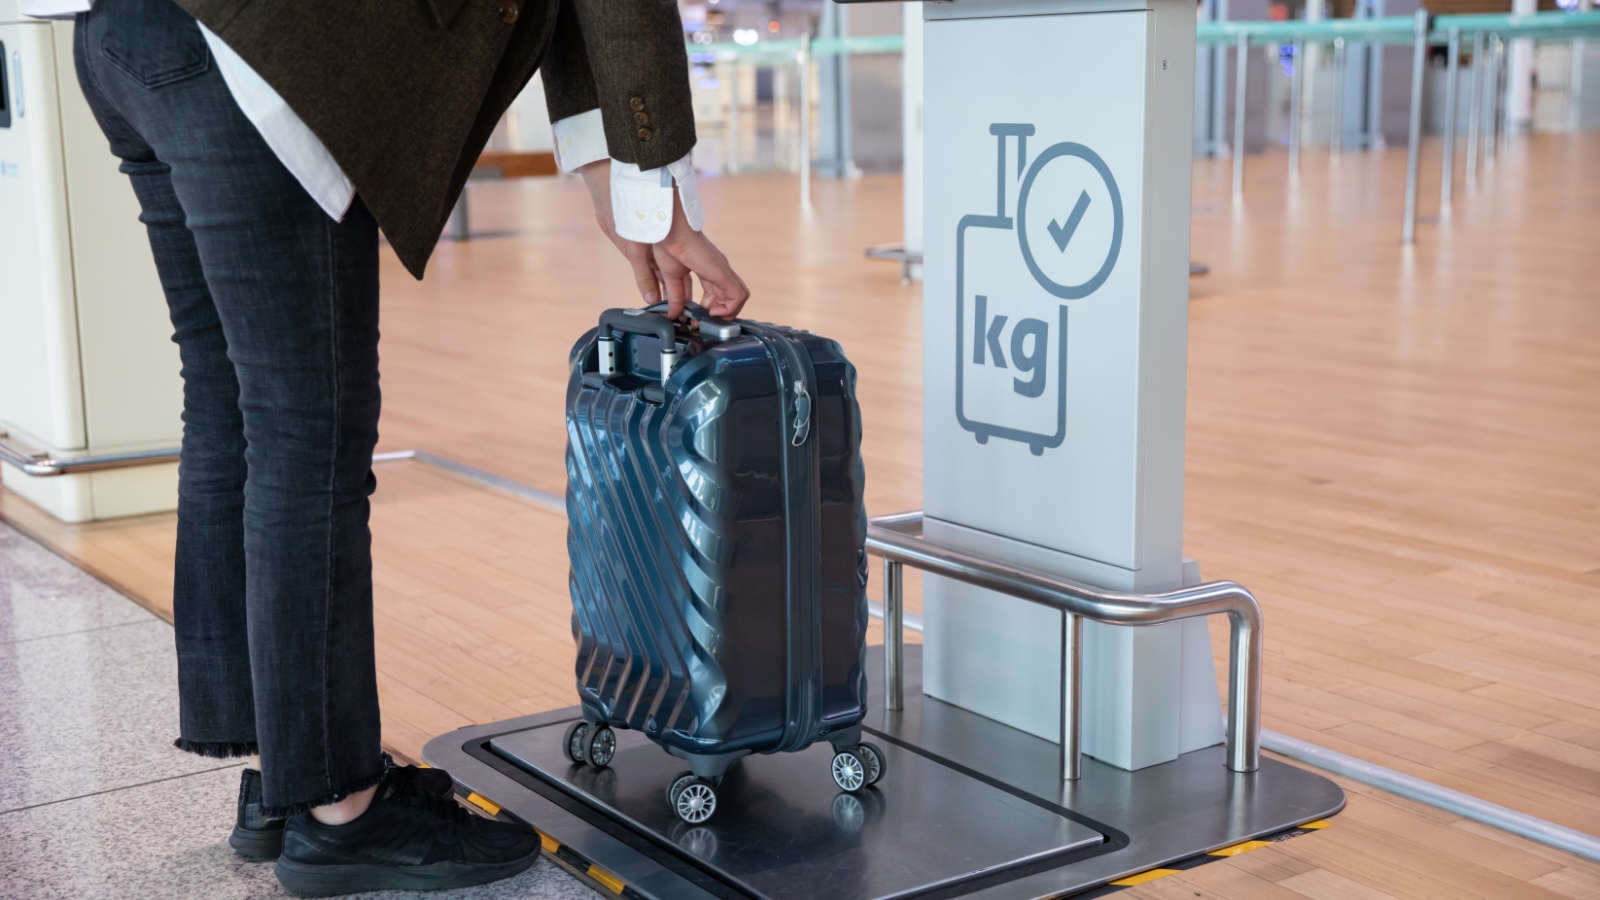 <p>Many airlines now charge for checked baggage, and some even charge for carry-on bags. These fees can add up quickly, especially if you’re traveling with family or need to bring extra luggage.</p>